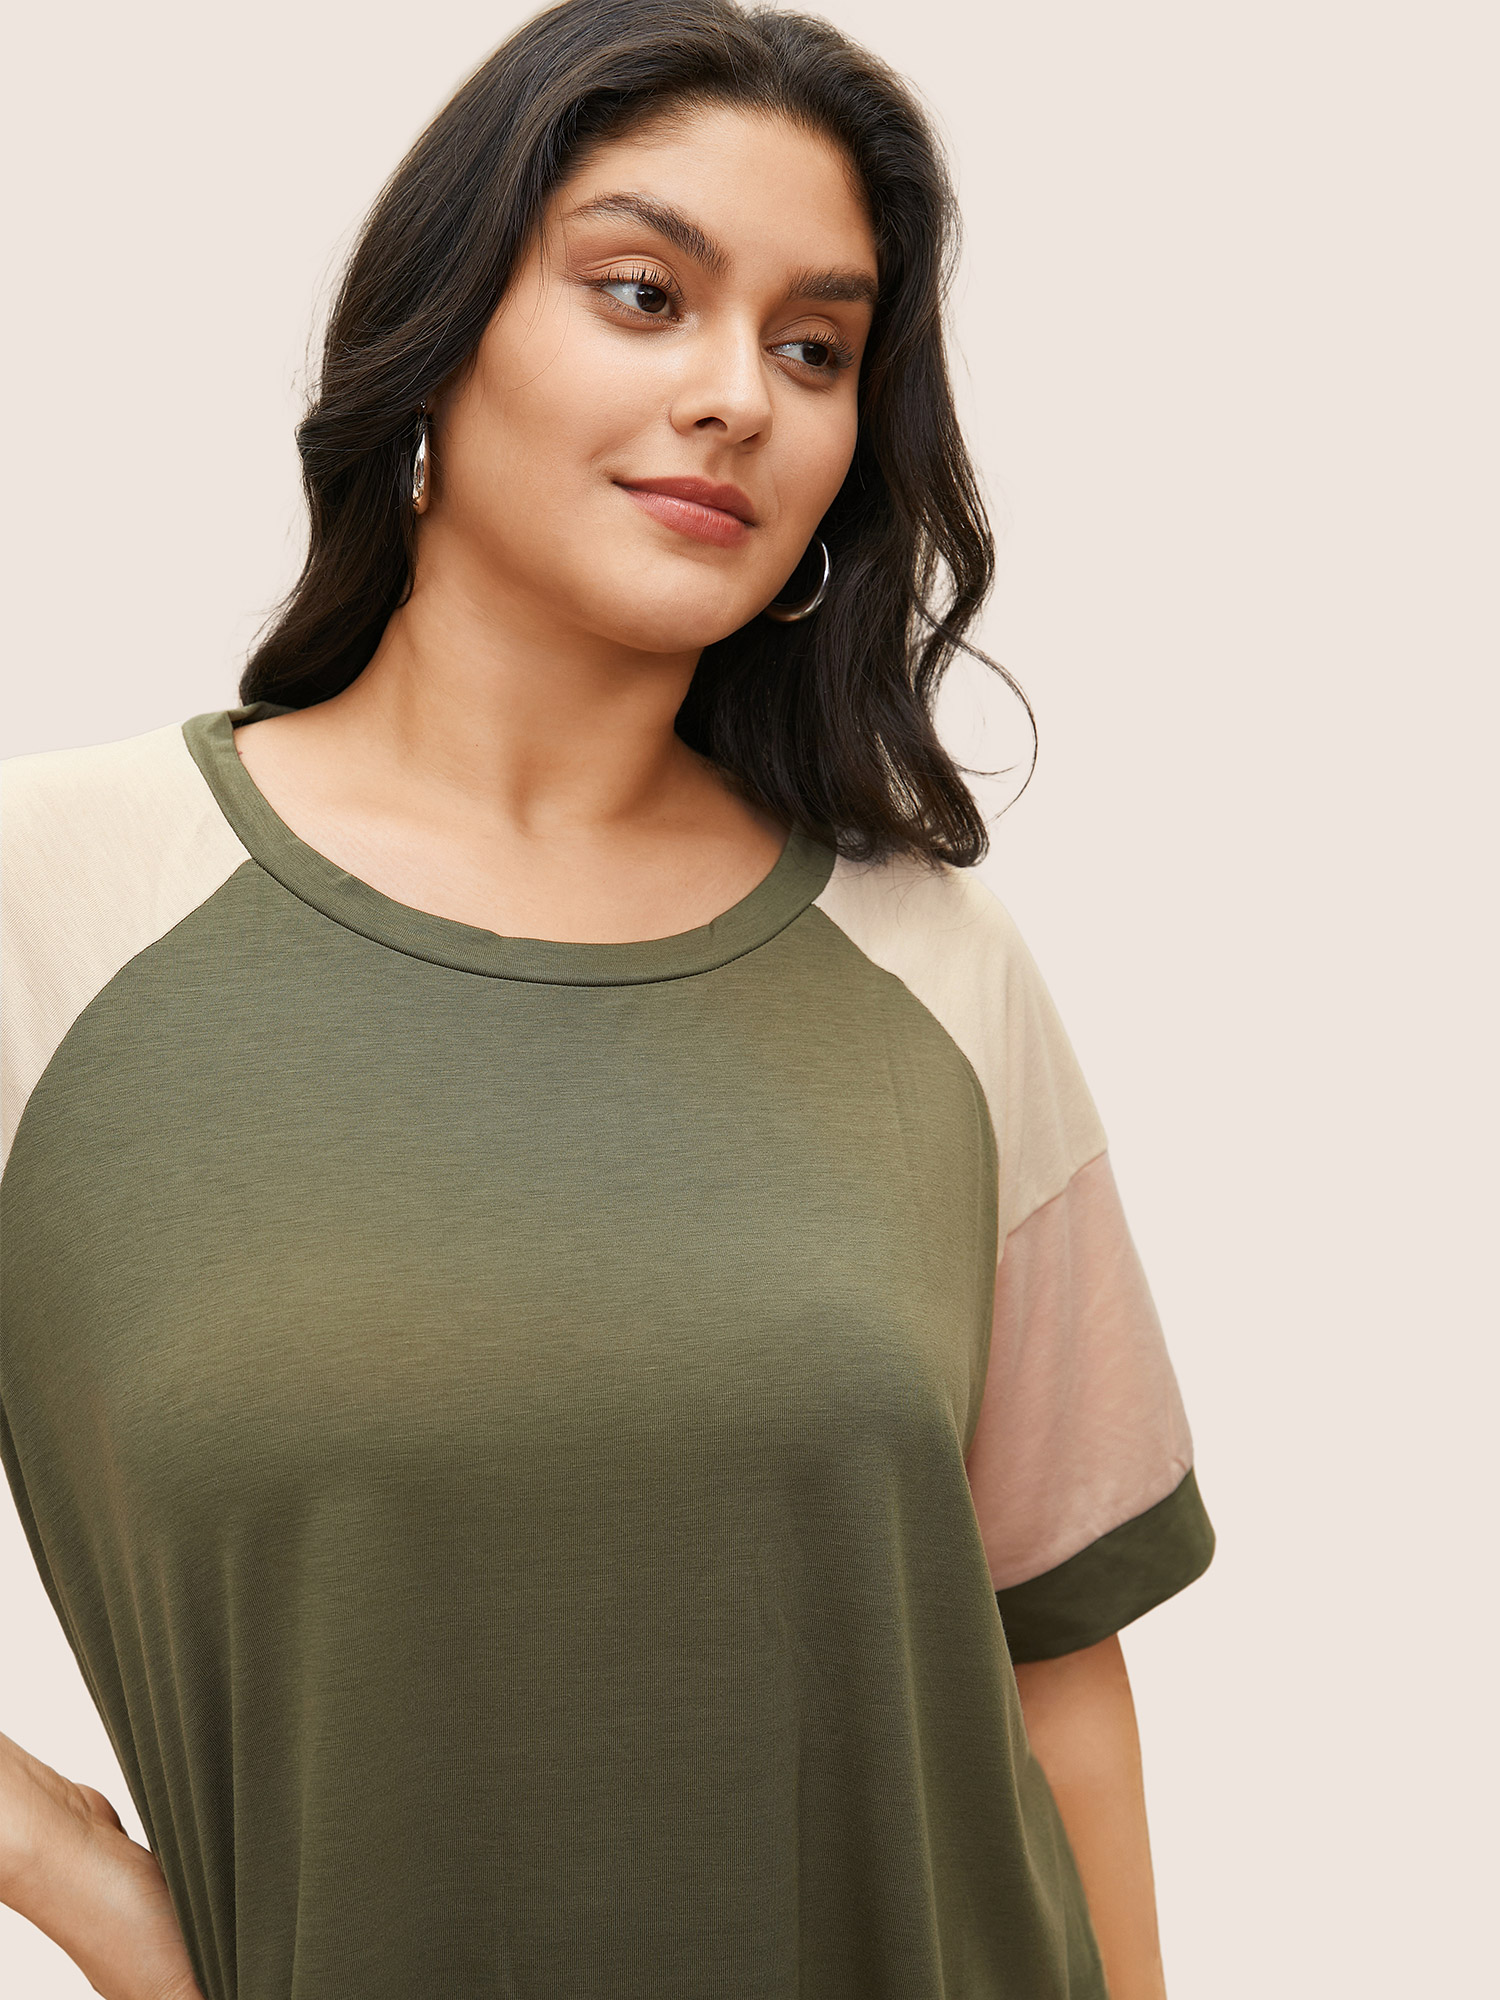 

Plus Size Colorblock Contrast Crew Neck Raglan Sleeve T-shirt ArmyGreen Women Casual Contrast Colorblock Round Neck Everyday T-shirts BloomChic